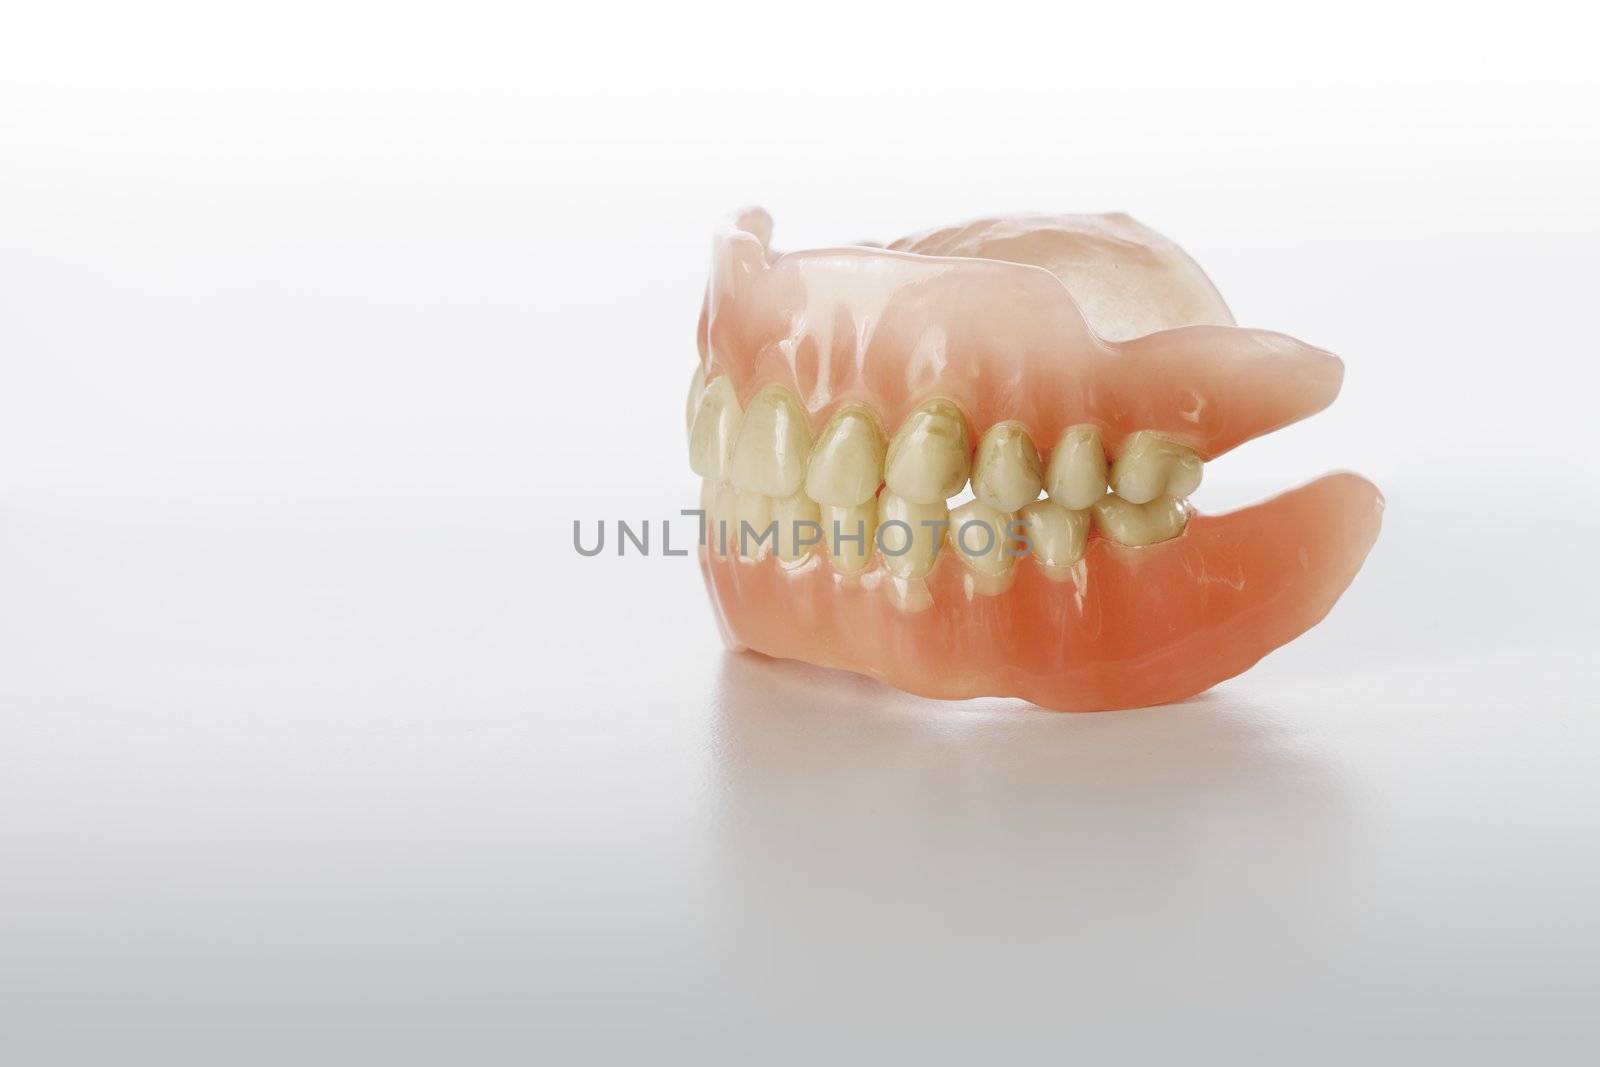 Old Stained Dentures on light grey background.